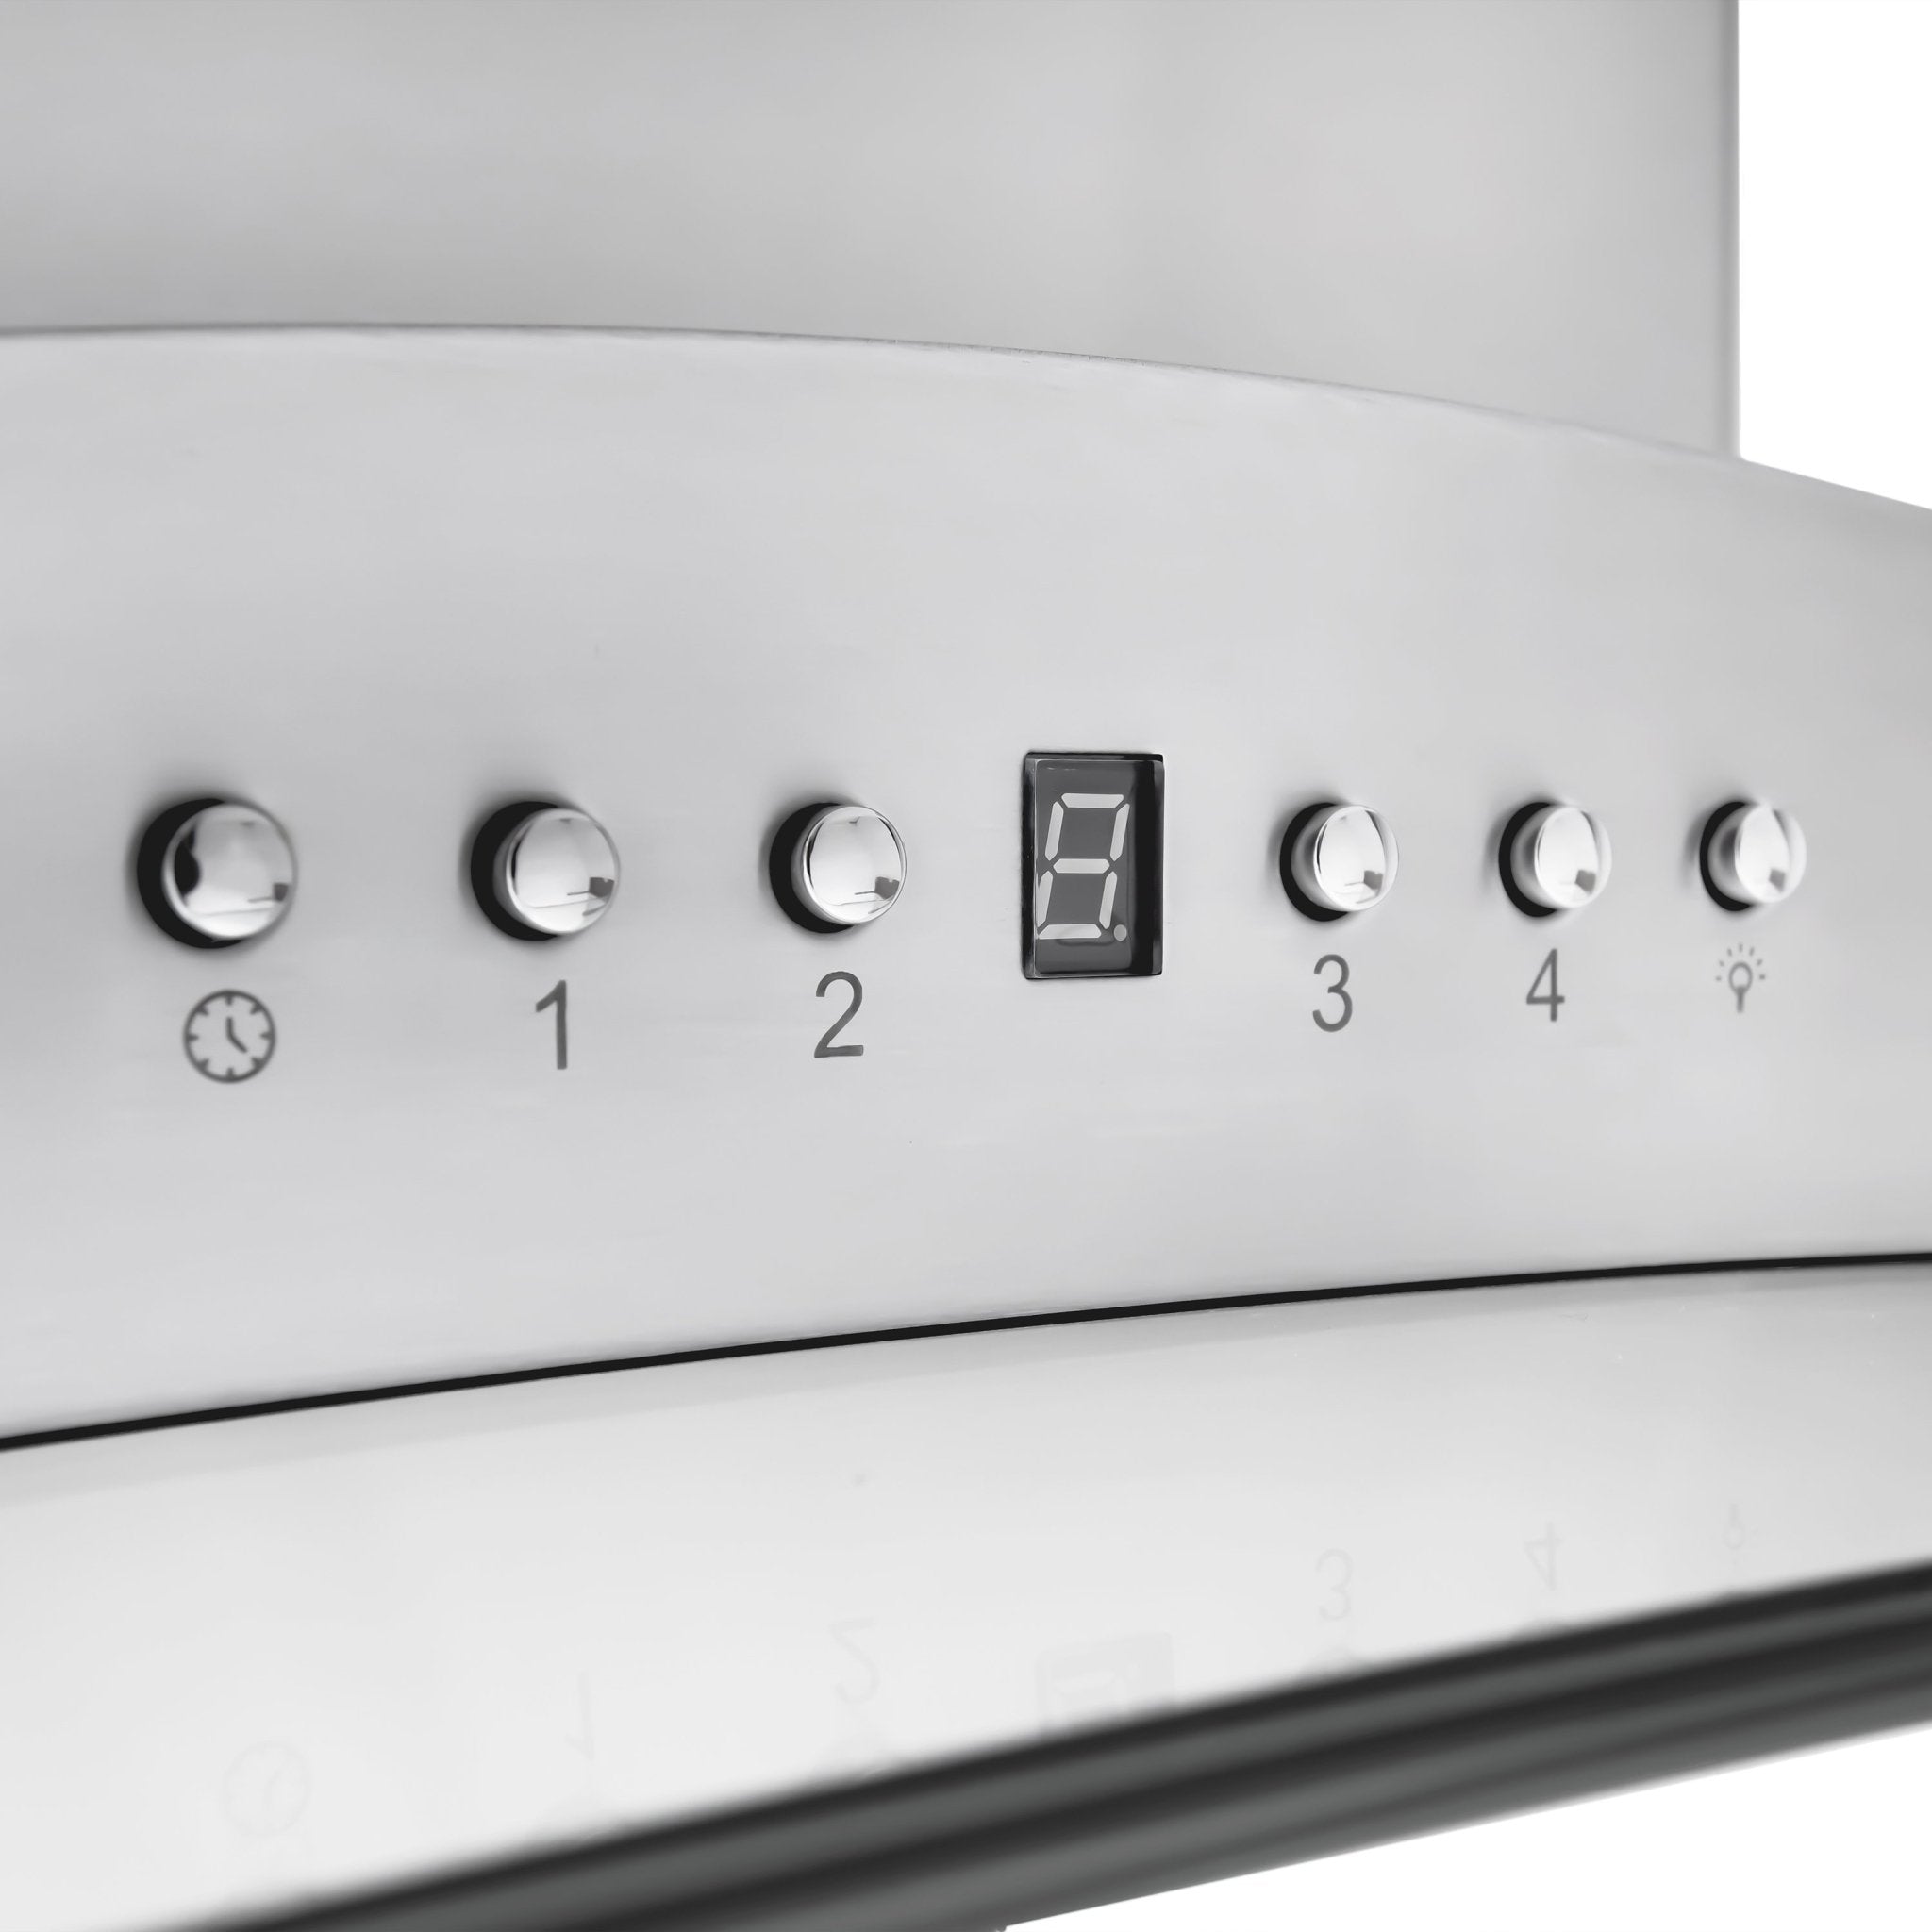 ZLINE Island Mount Range Hood in Stainless Steel & Glass (GL9i) button and display panel.